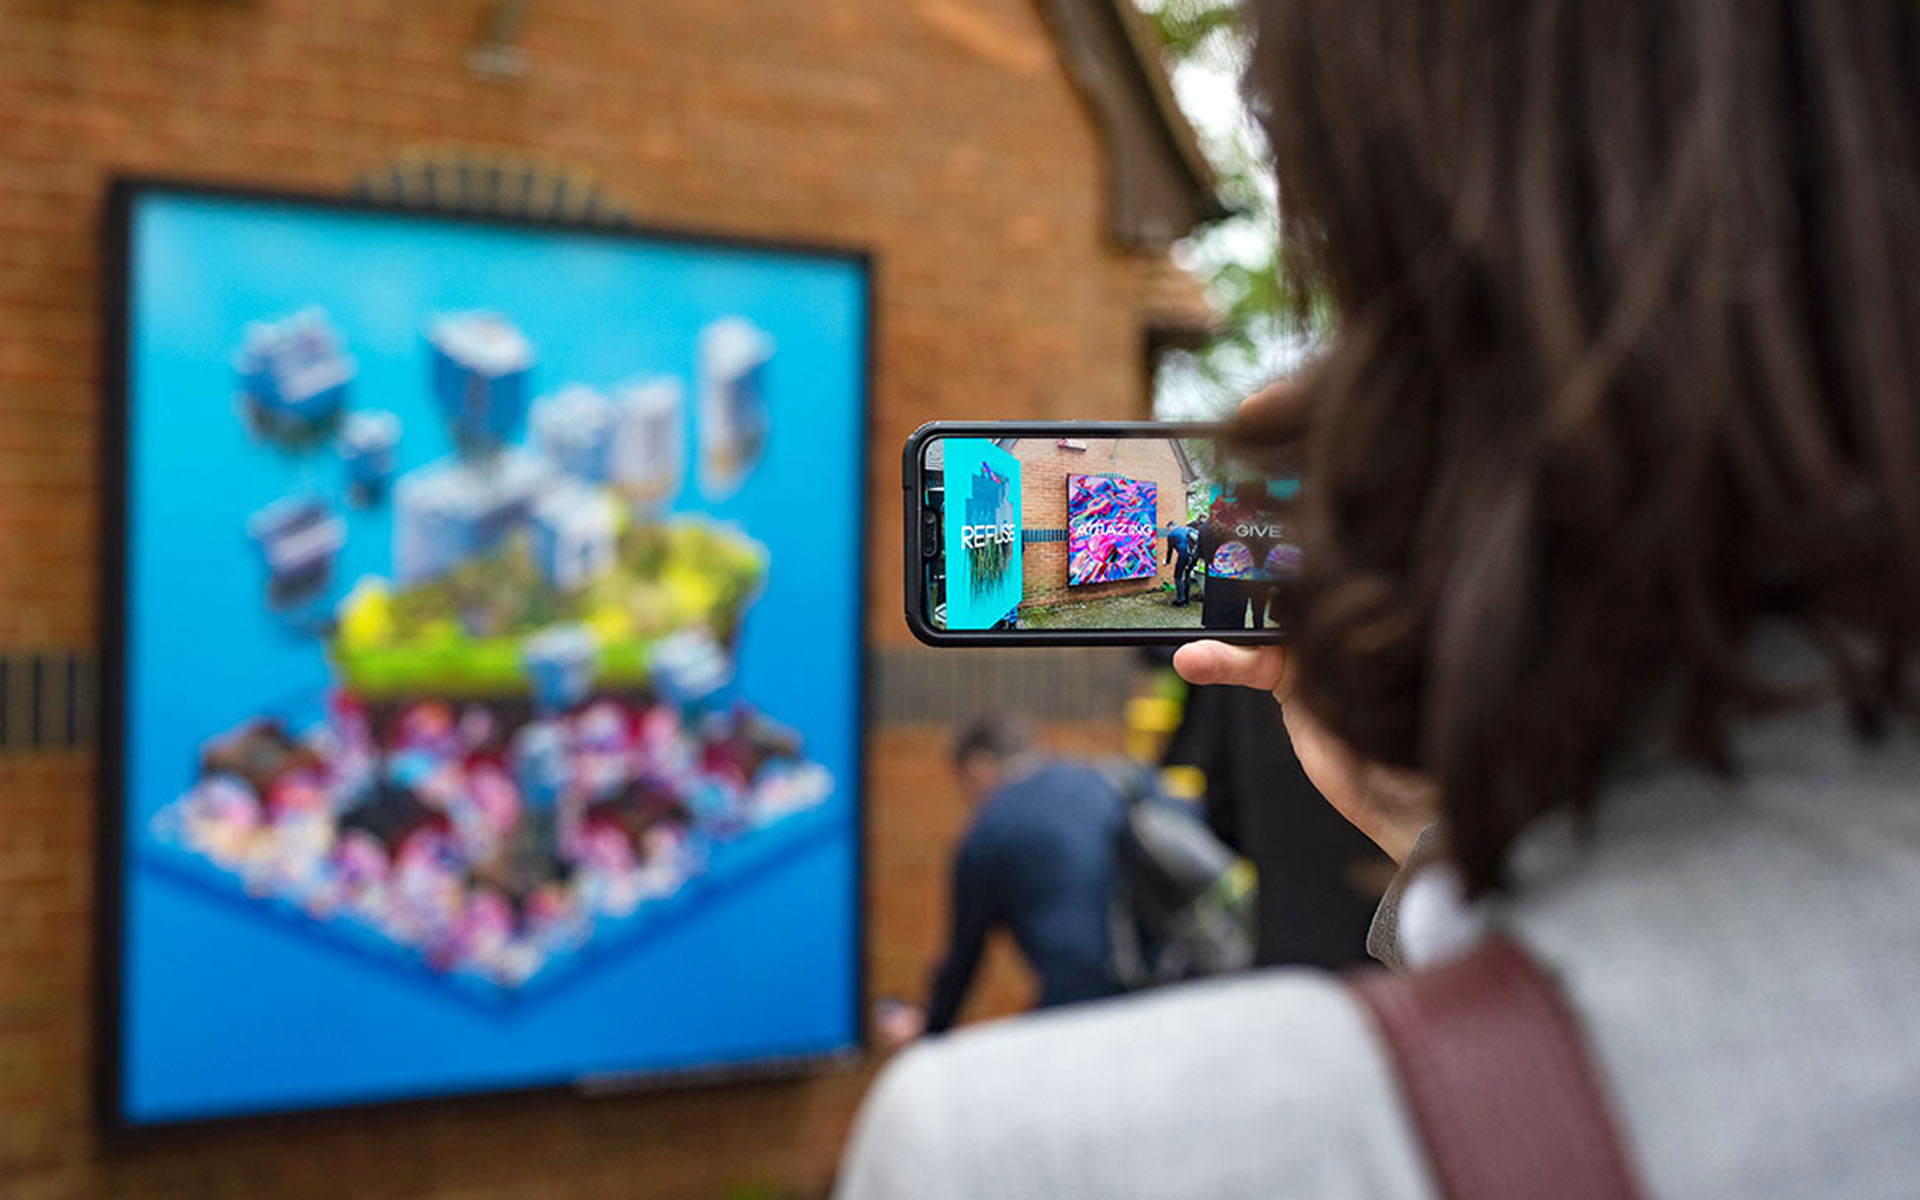 alt: A person holding a phone in front of a billboard on furtherfield gallery, through the phone you can see AR being using to view virtual artworks.